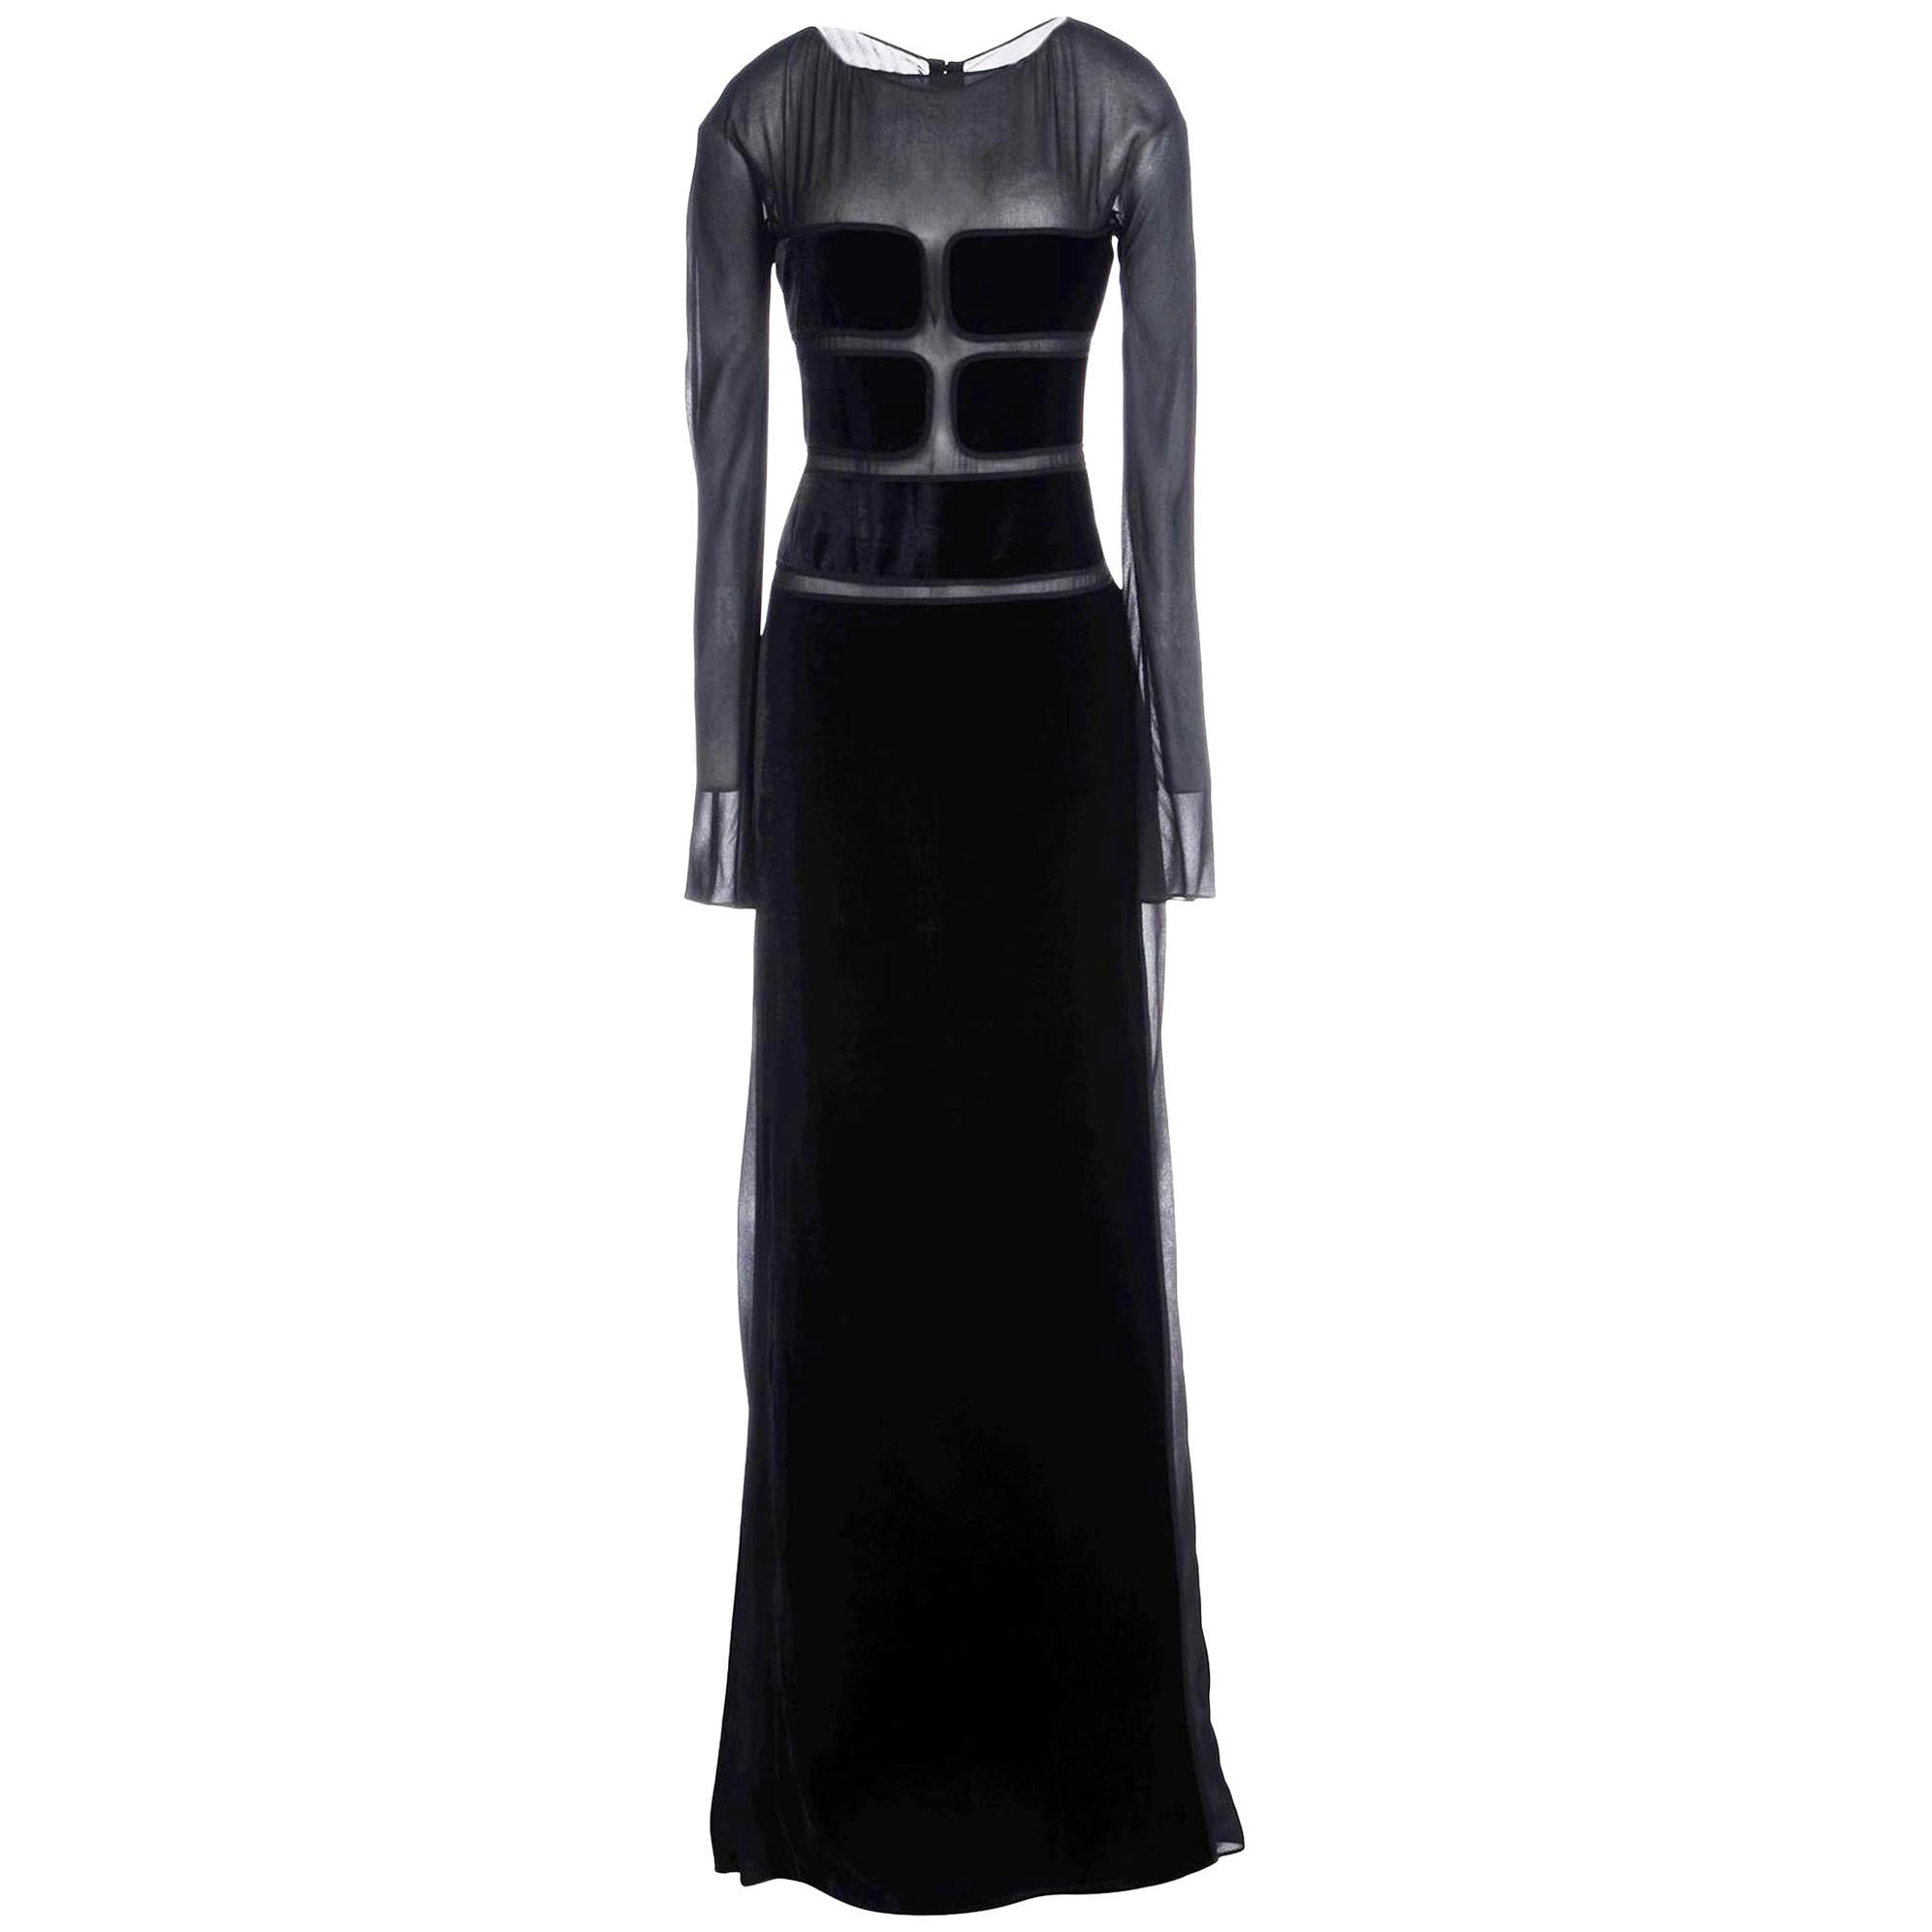 New Tom Ford Ad Campaign Black Velvet Sheer Cutout Dress Gown 42